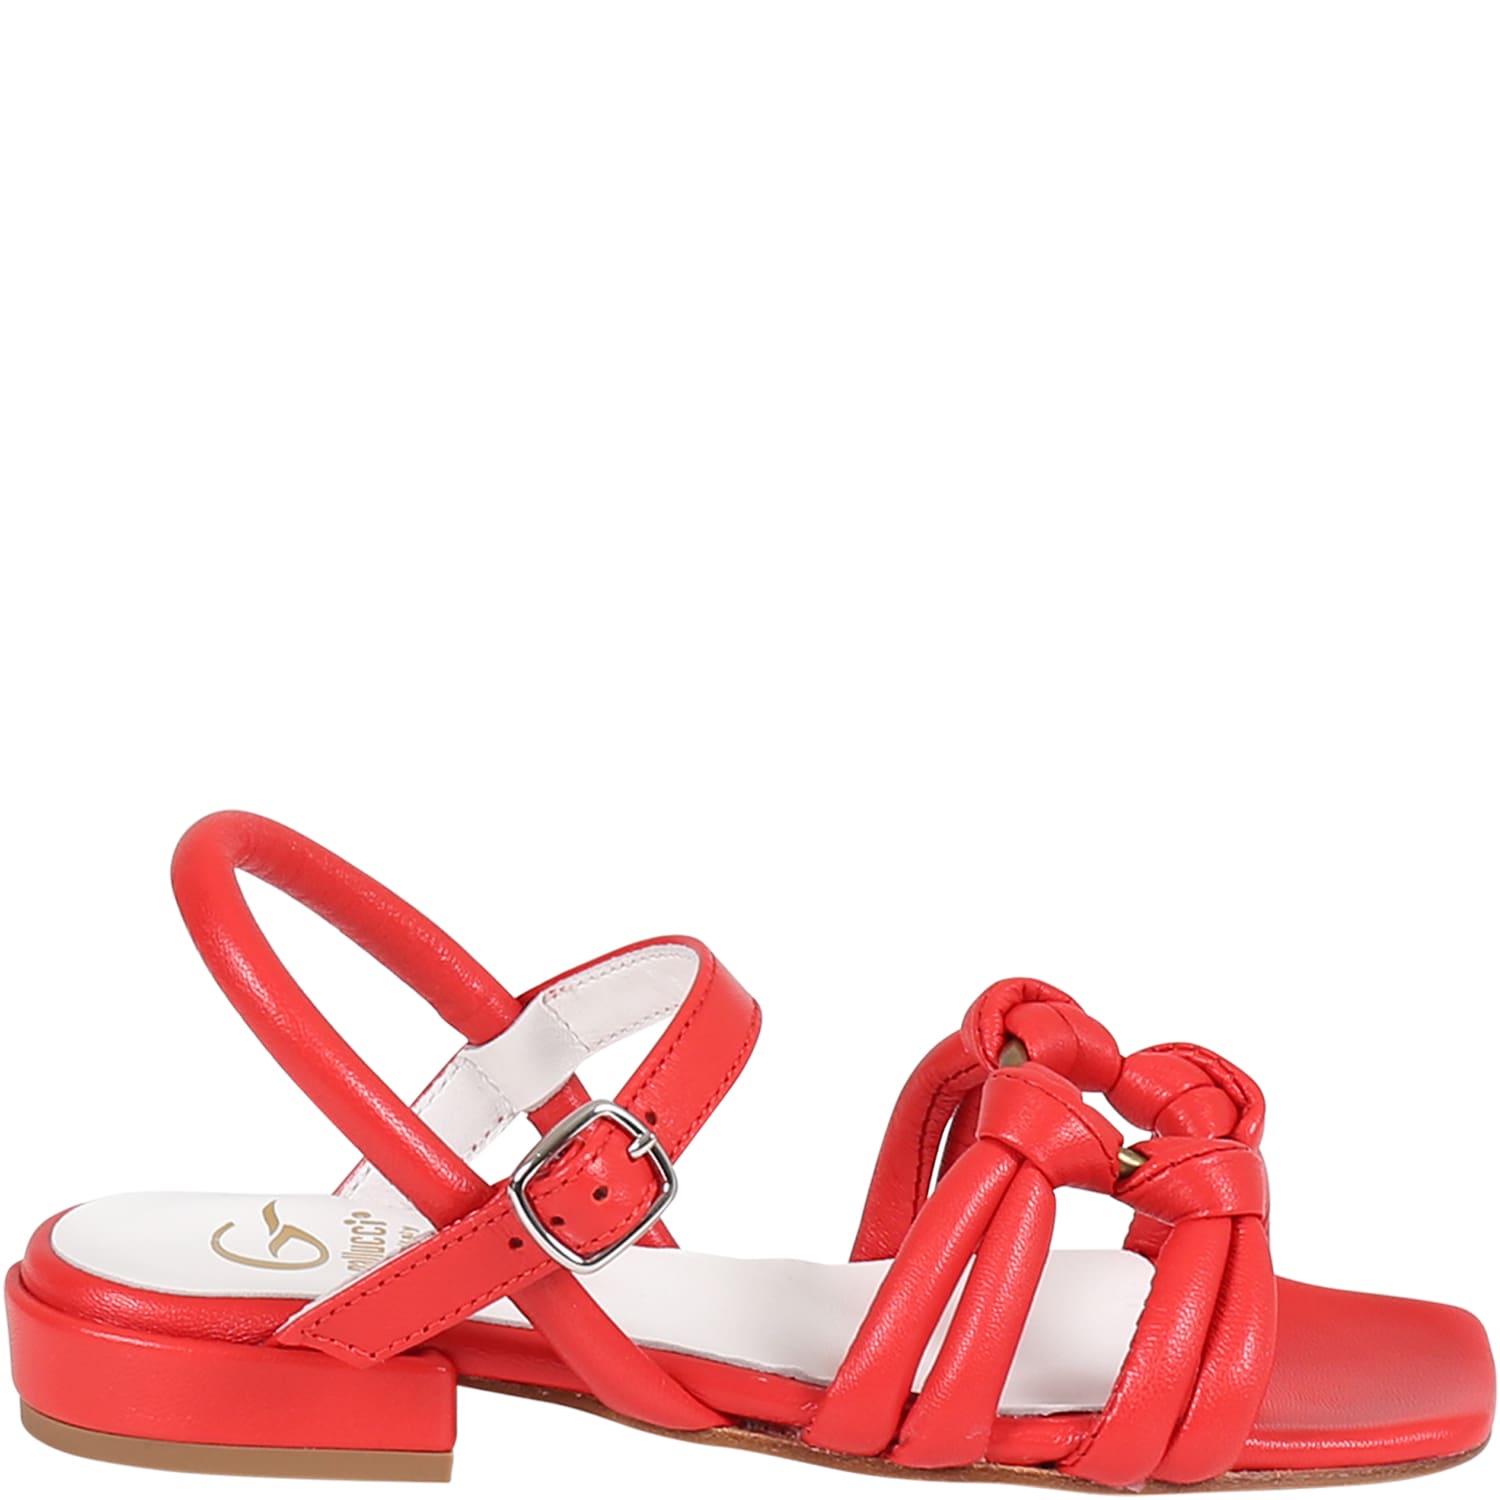 GALLUCCI RED SANDALS FOR GIRL